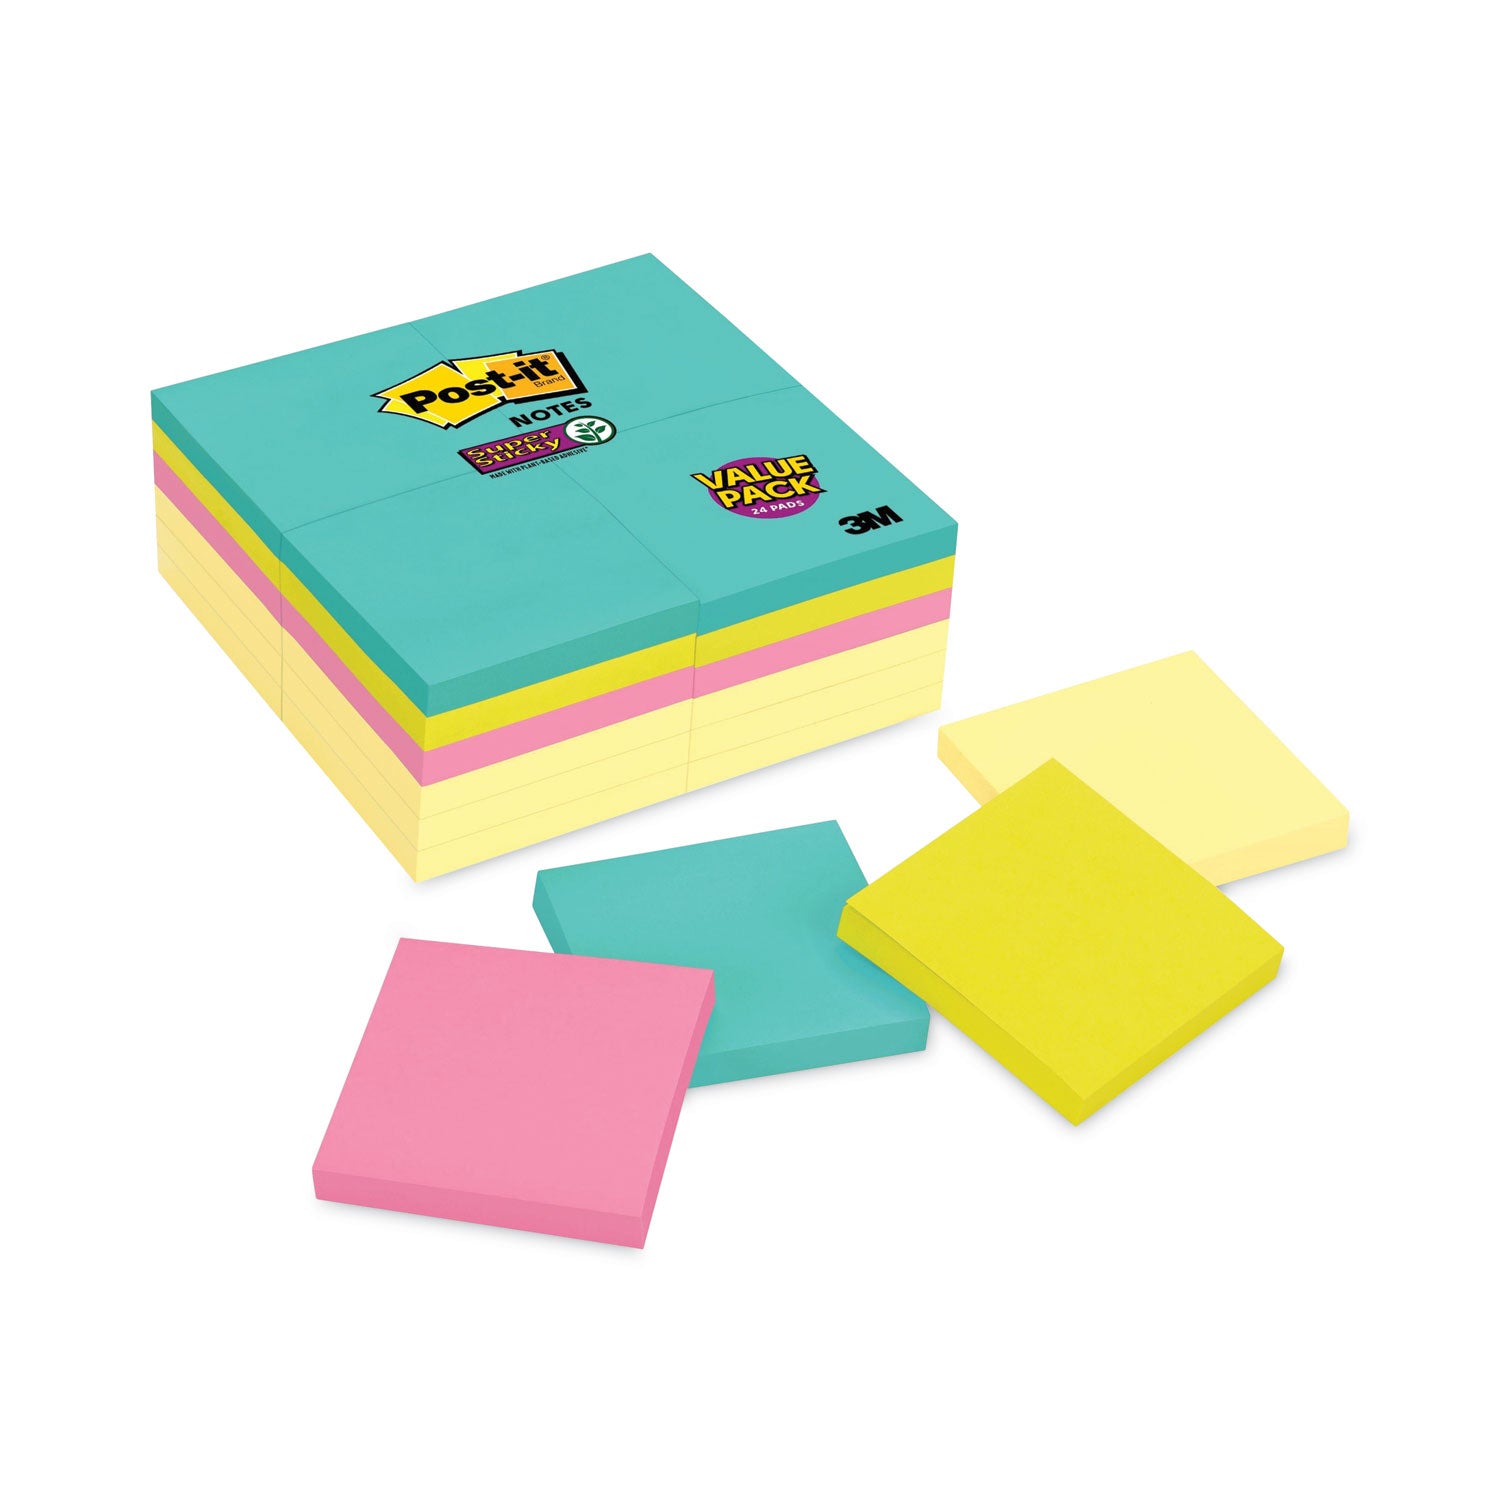 self-stick-notes-office-pack-3-x-3-supernova-neons-collection-colors-90-sheets-pad-24-pads-pack_mmm65424sscym - 1